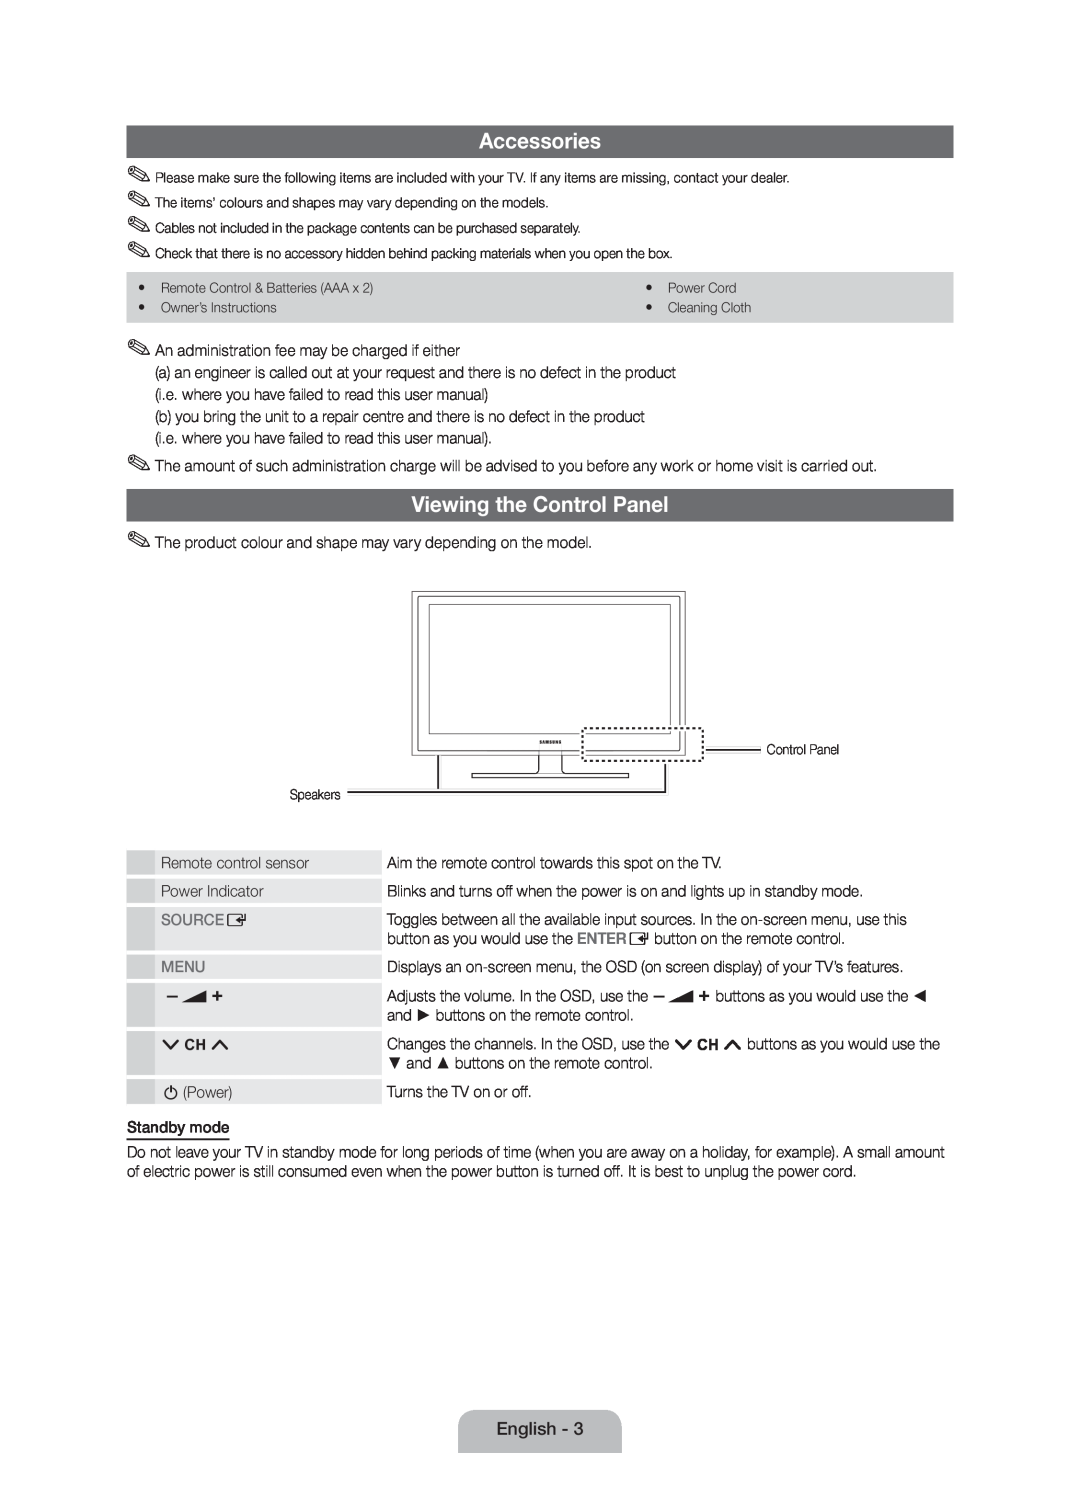 Samsung Series 5 user manual Accessories, Viewing the Control Panel, Source E, Menu 